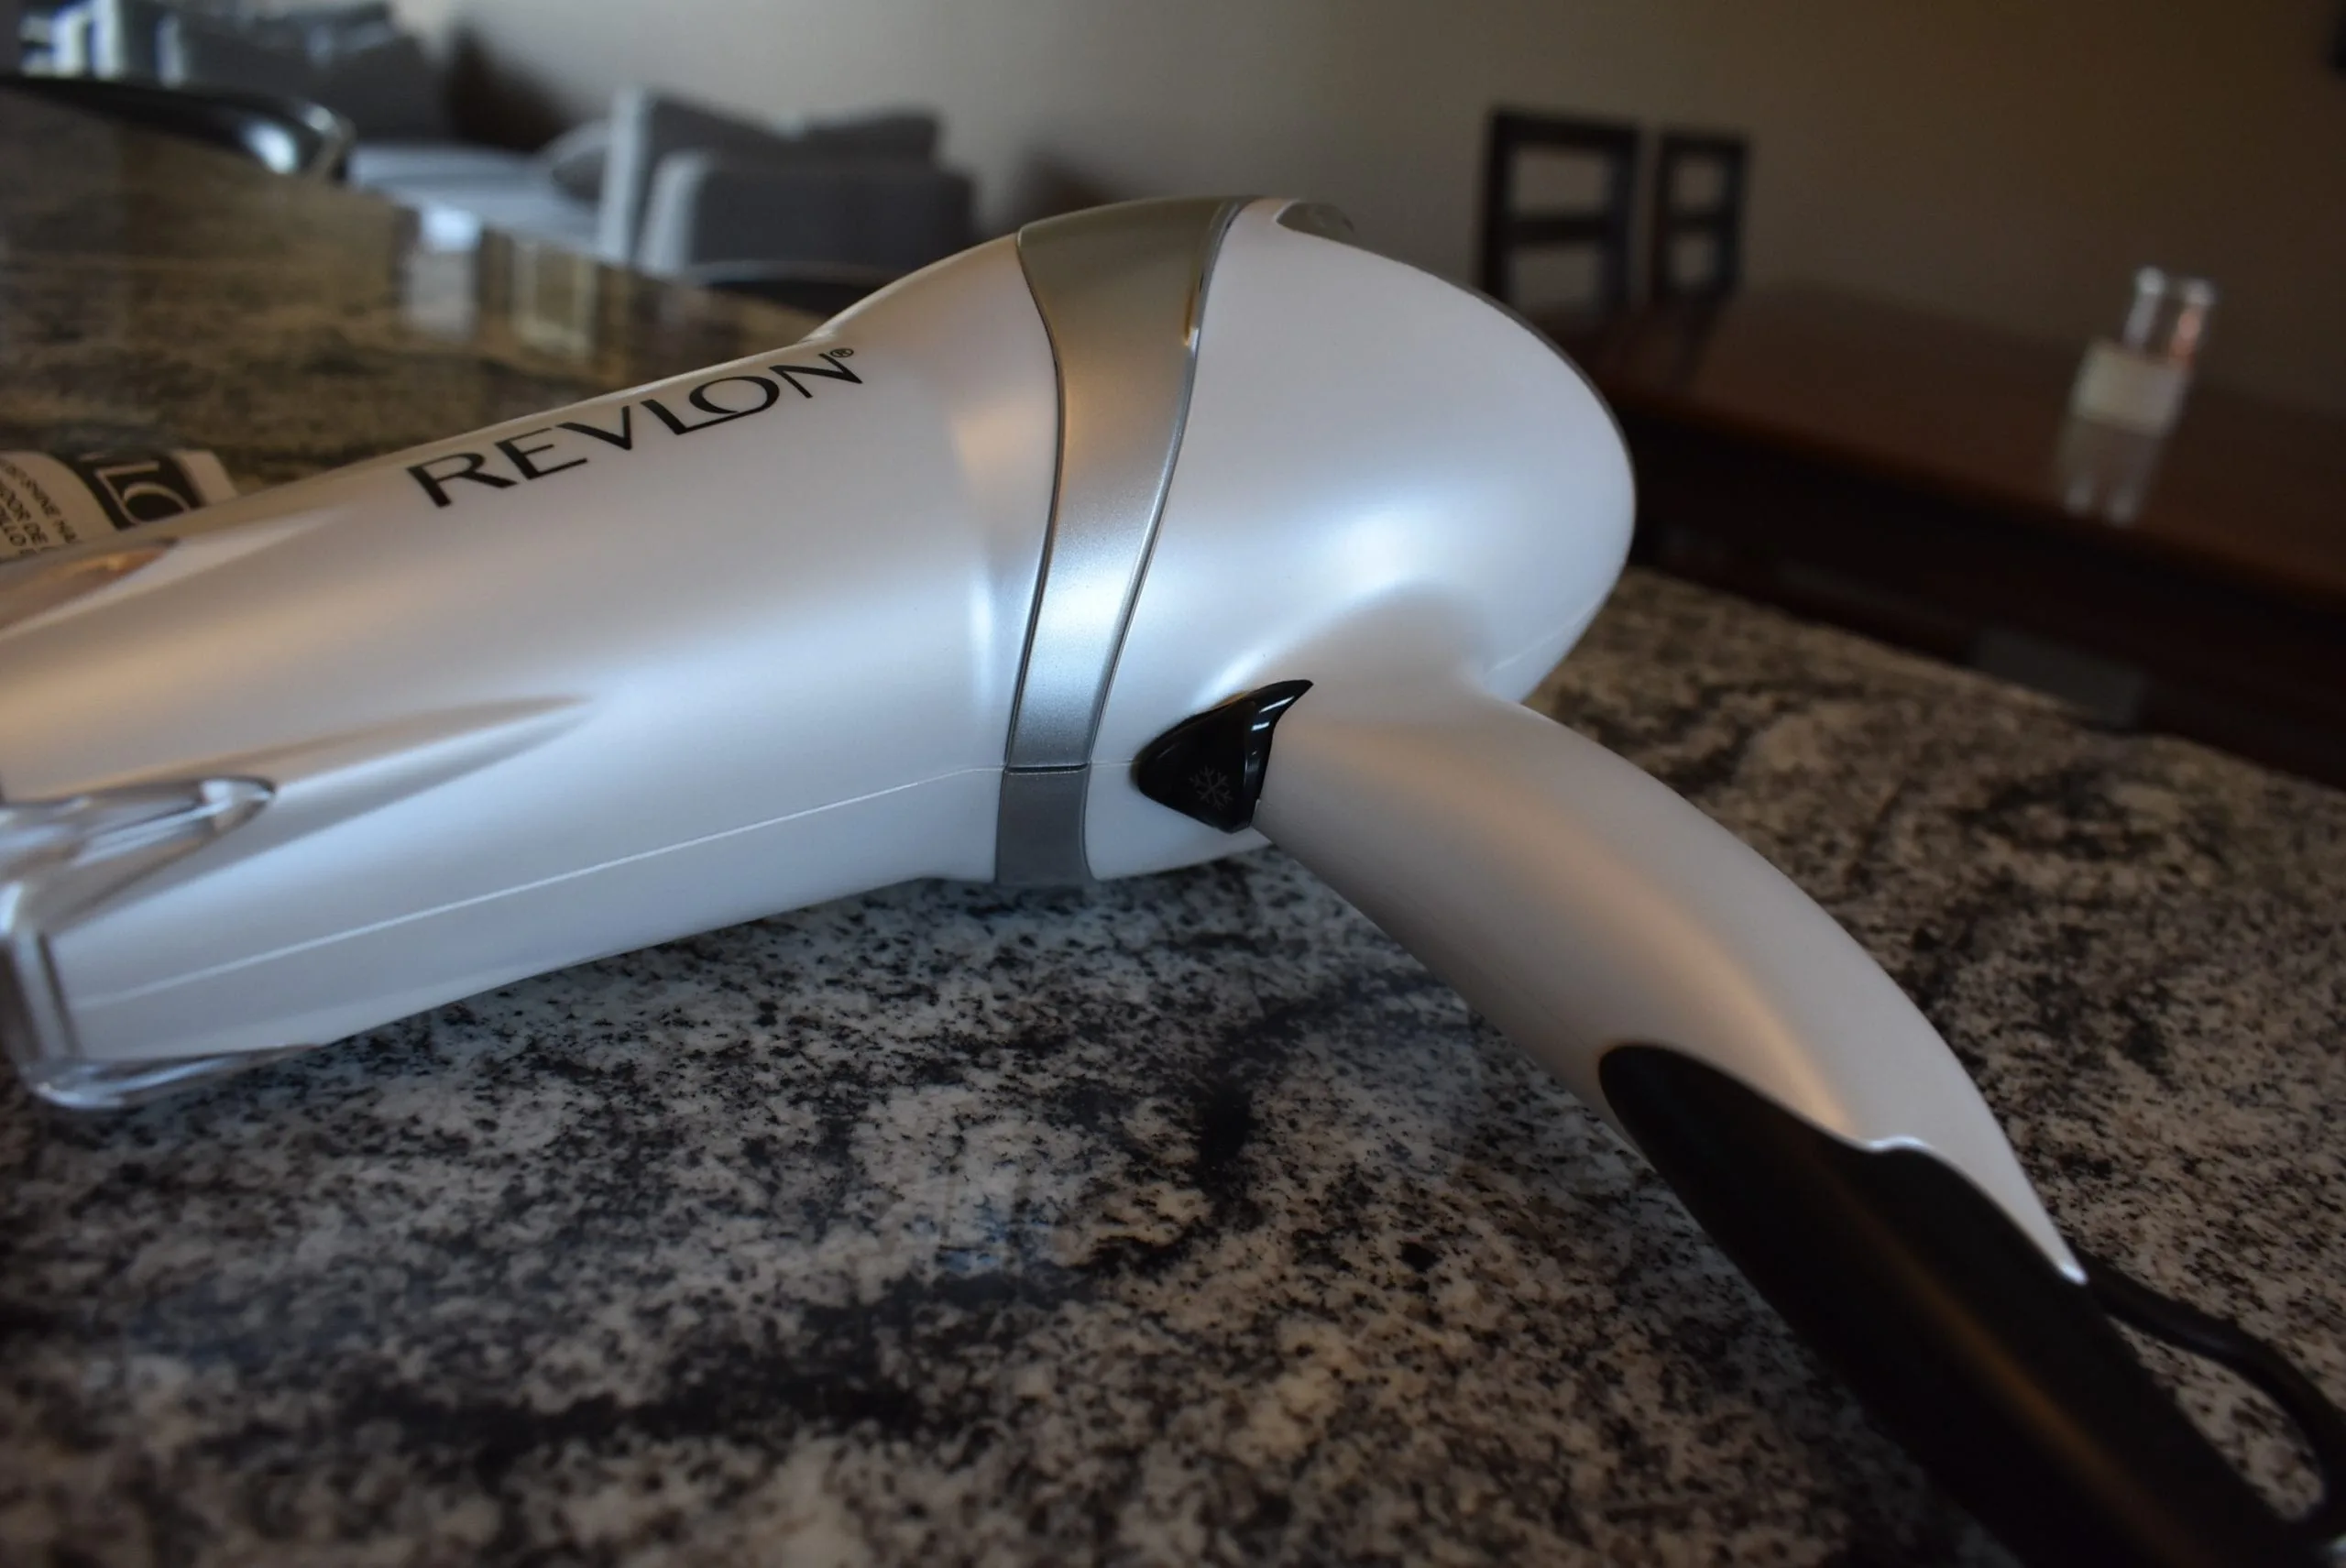 The white Revlon hair dryer sitting on a counter